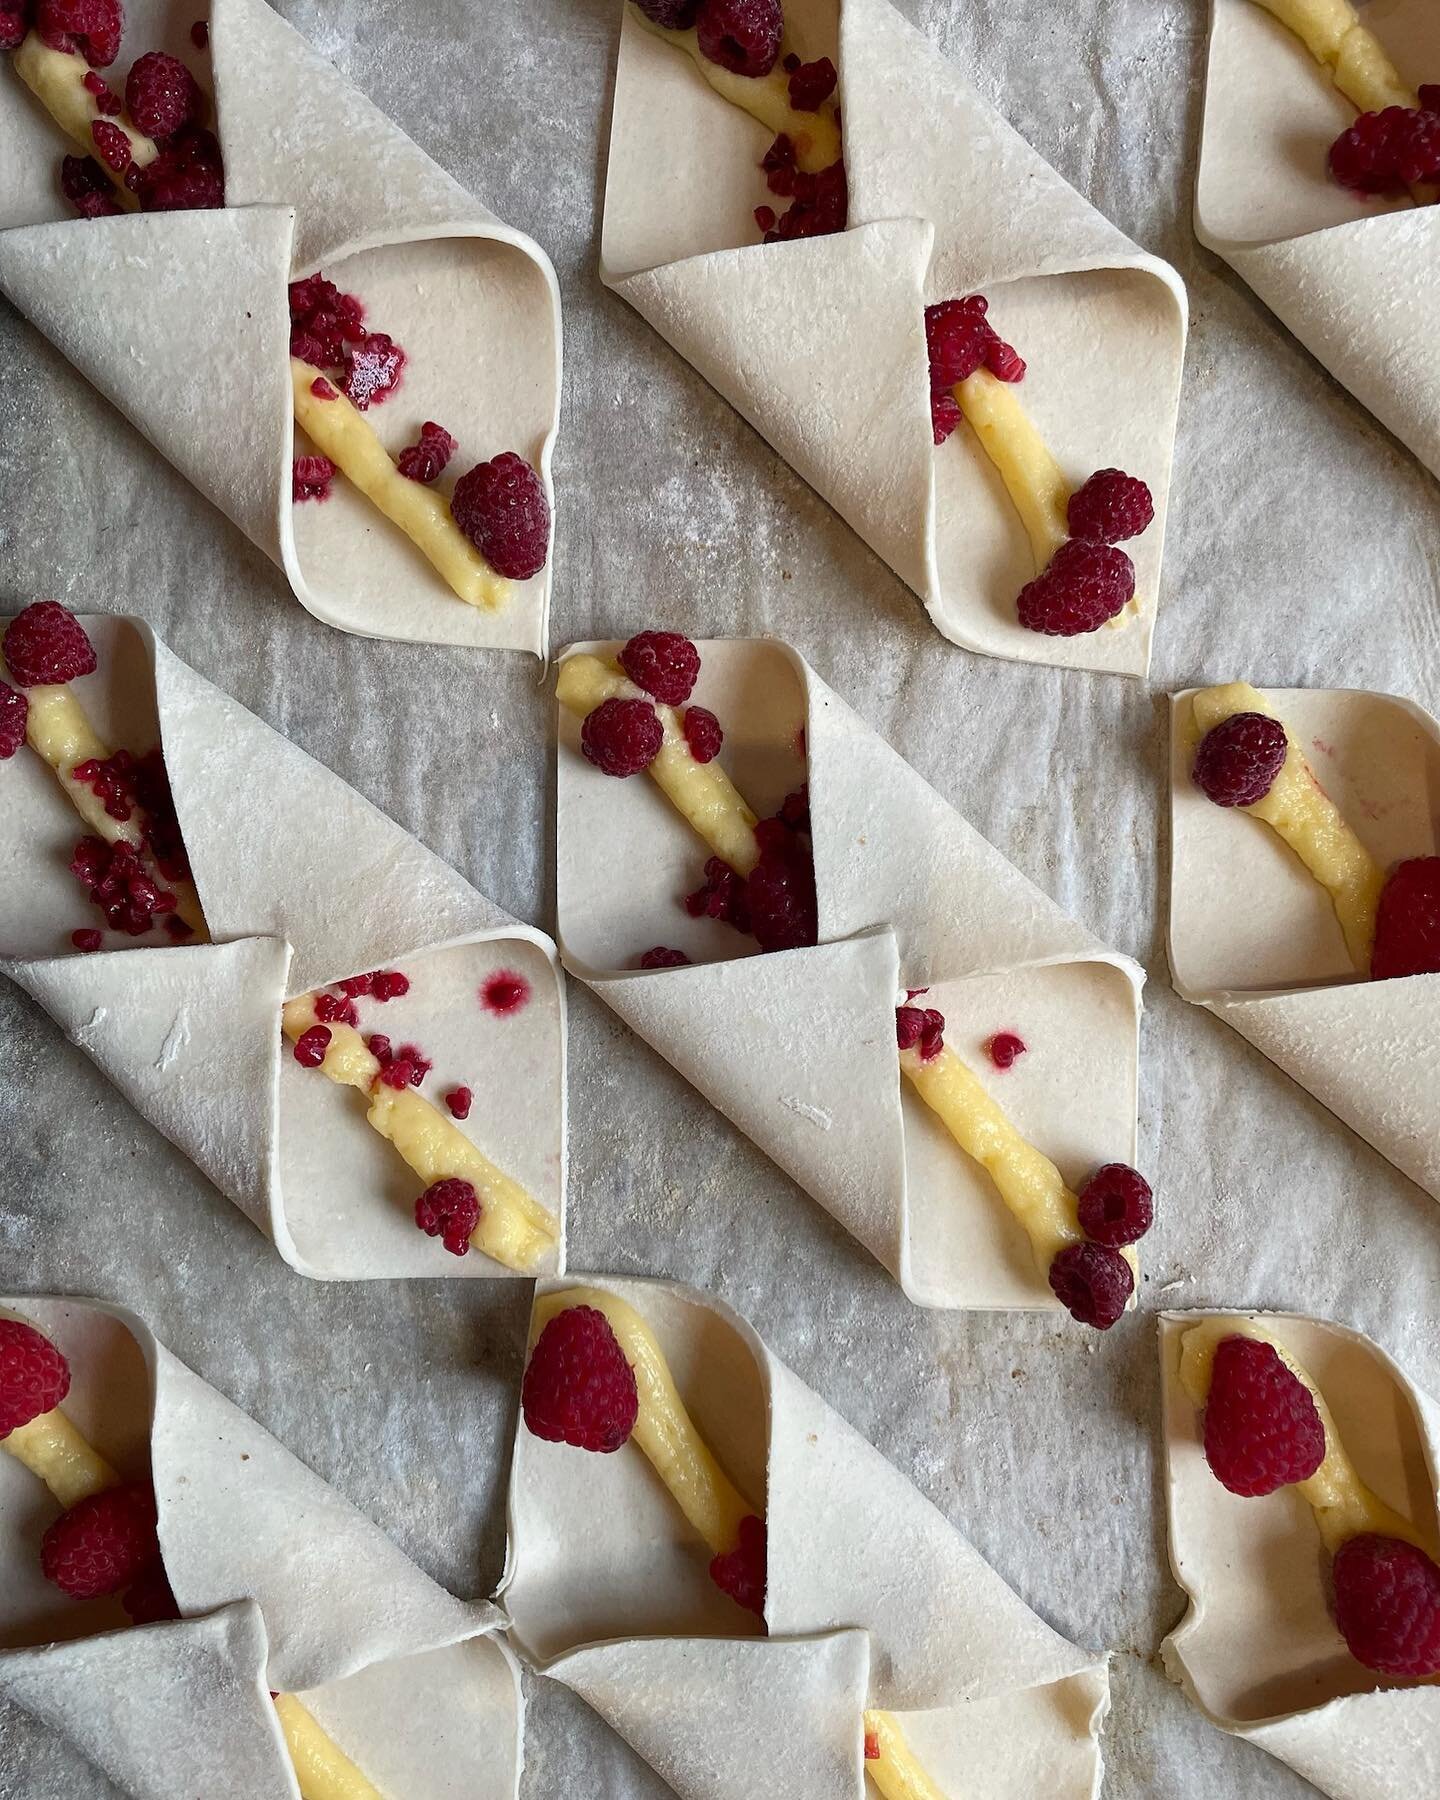 Before the sizzle and the scent of baking. Here&rsquo;s a sneak peek of our raspberry turnovers in all their delicious glory. 😍 

#pastrylove #pastrylover #raspberryturnover #bakinglove #bakerylife #bakeryonthewater #bakeryonthewatercotswolds #tradi